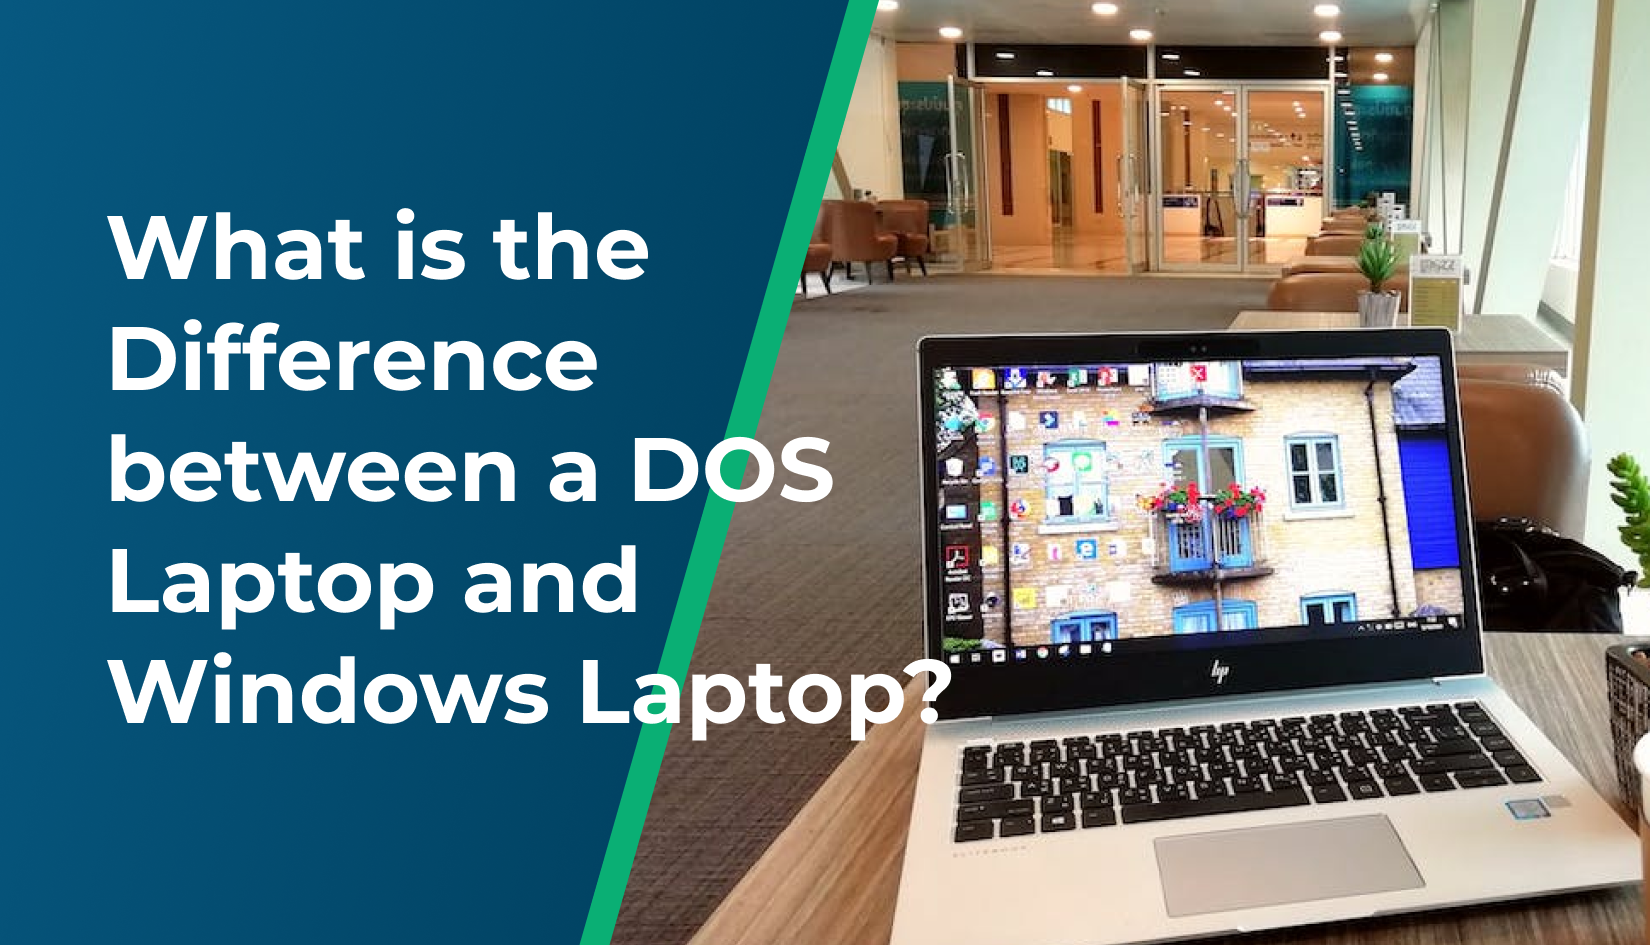 What is the Difference between a DOS Laptop and Windows Laptop?